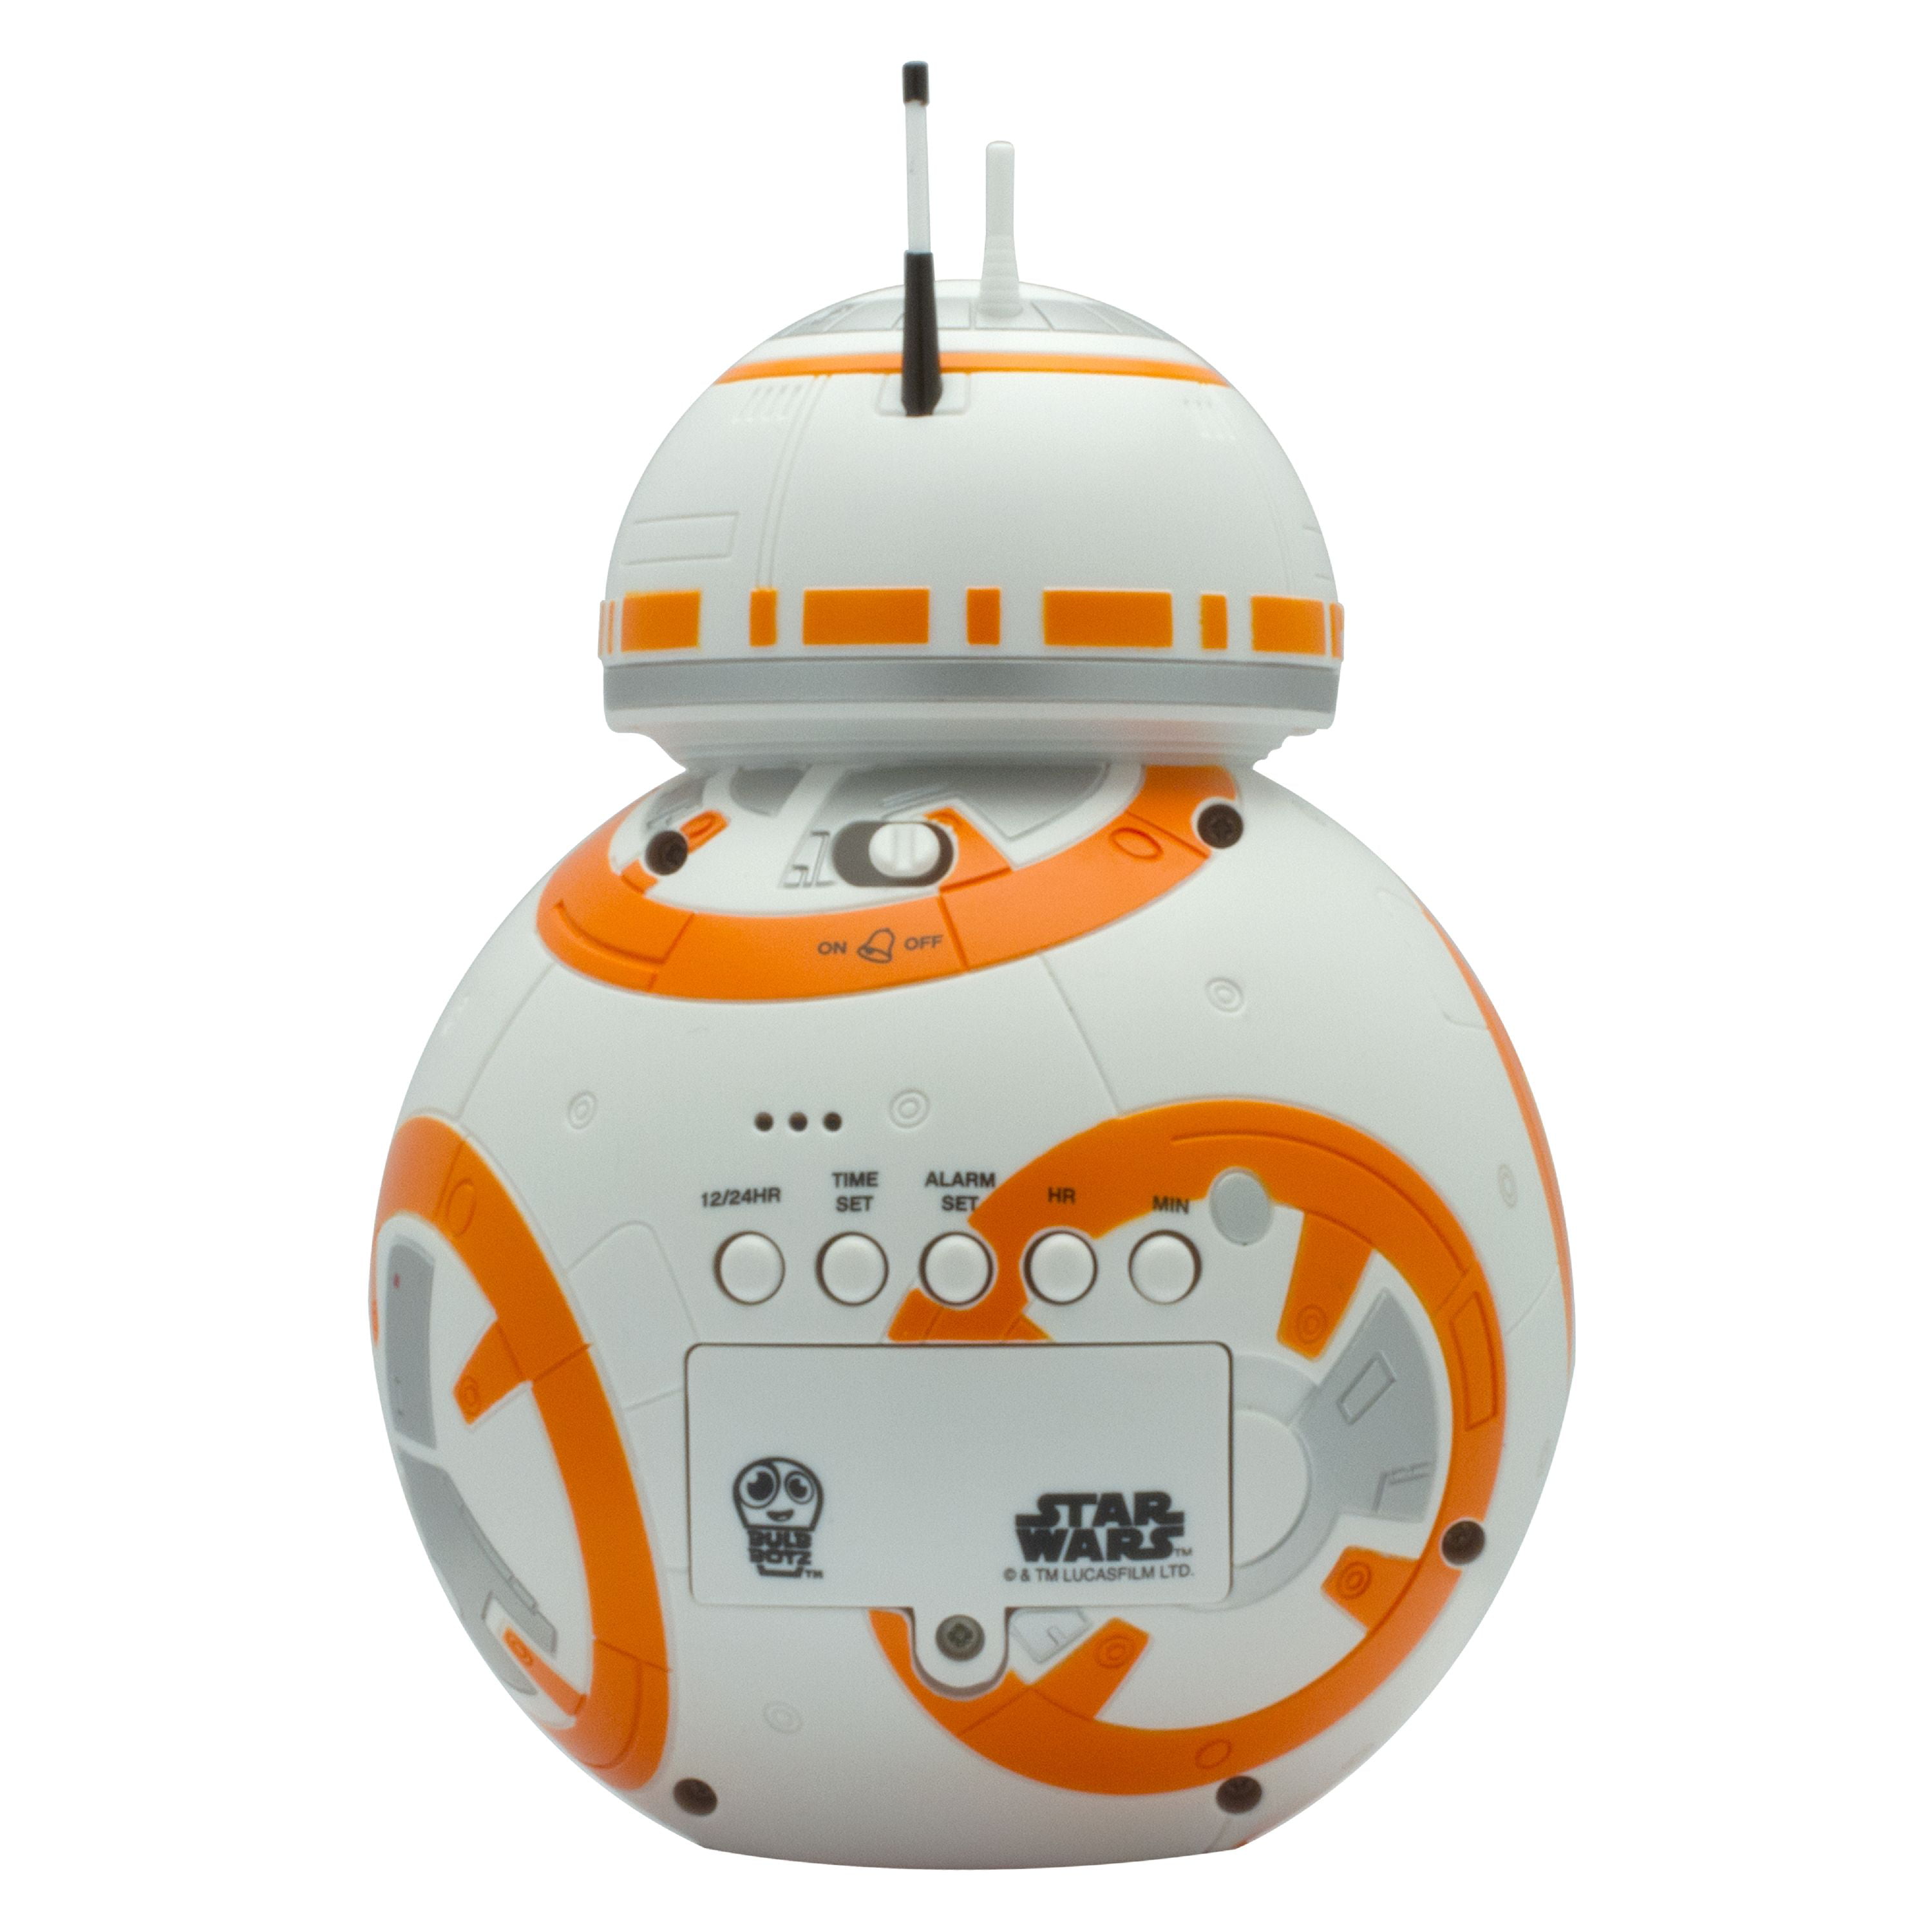 Star Wars BB8 Droid Sound Effects Noises Light Up Boxed Talking Alarm Clock 